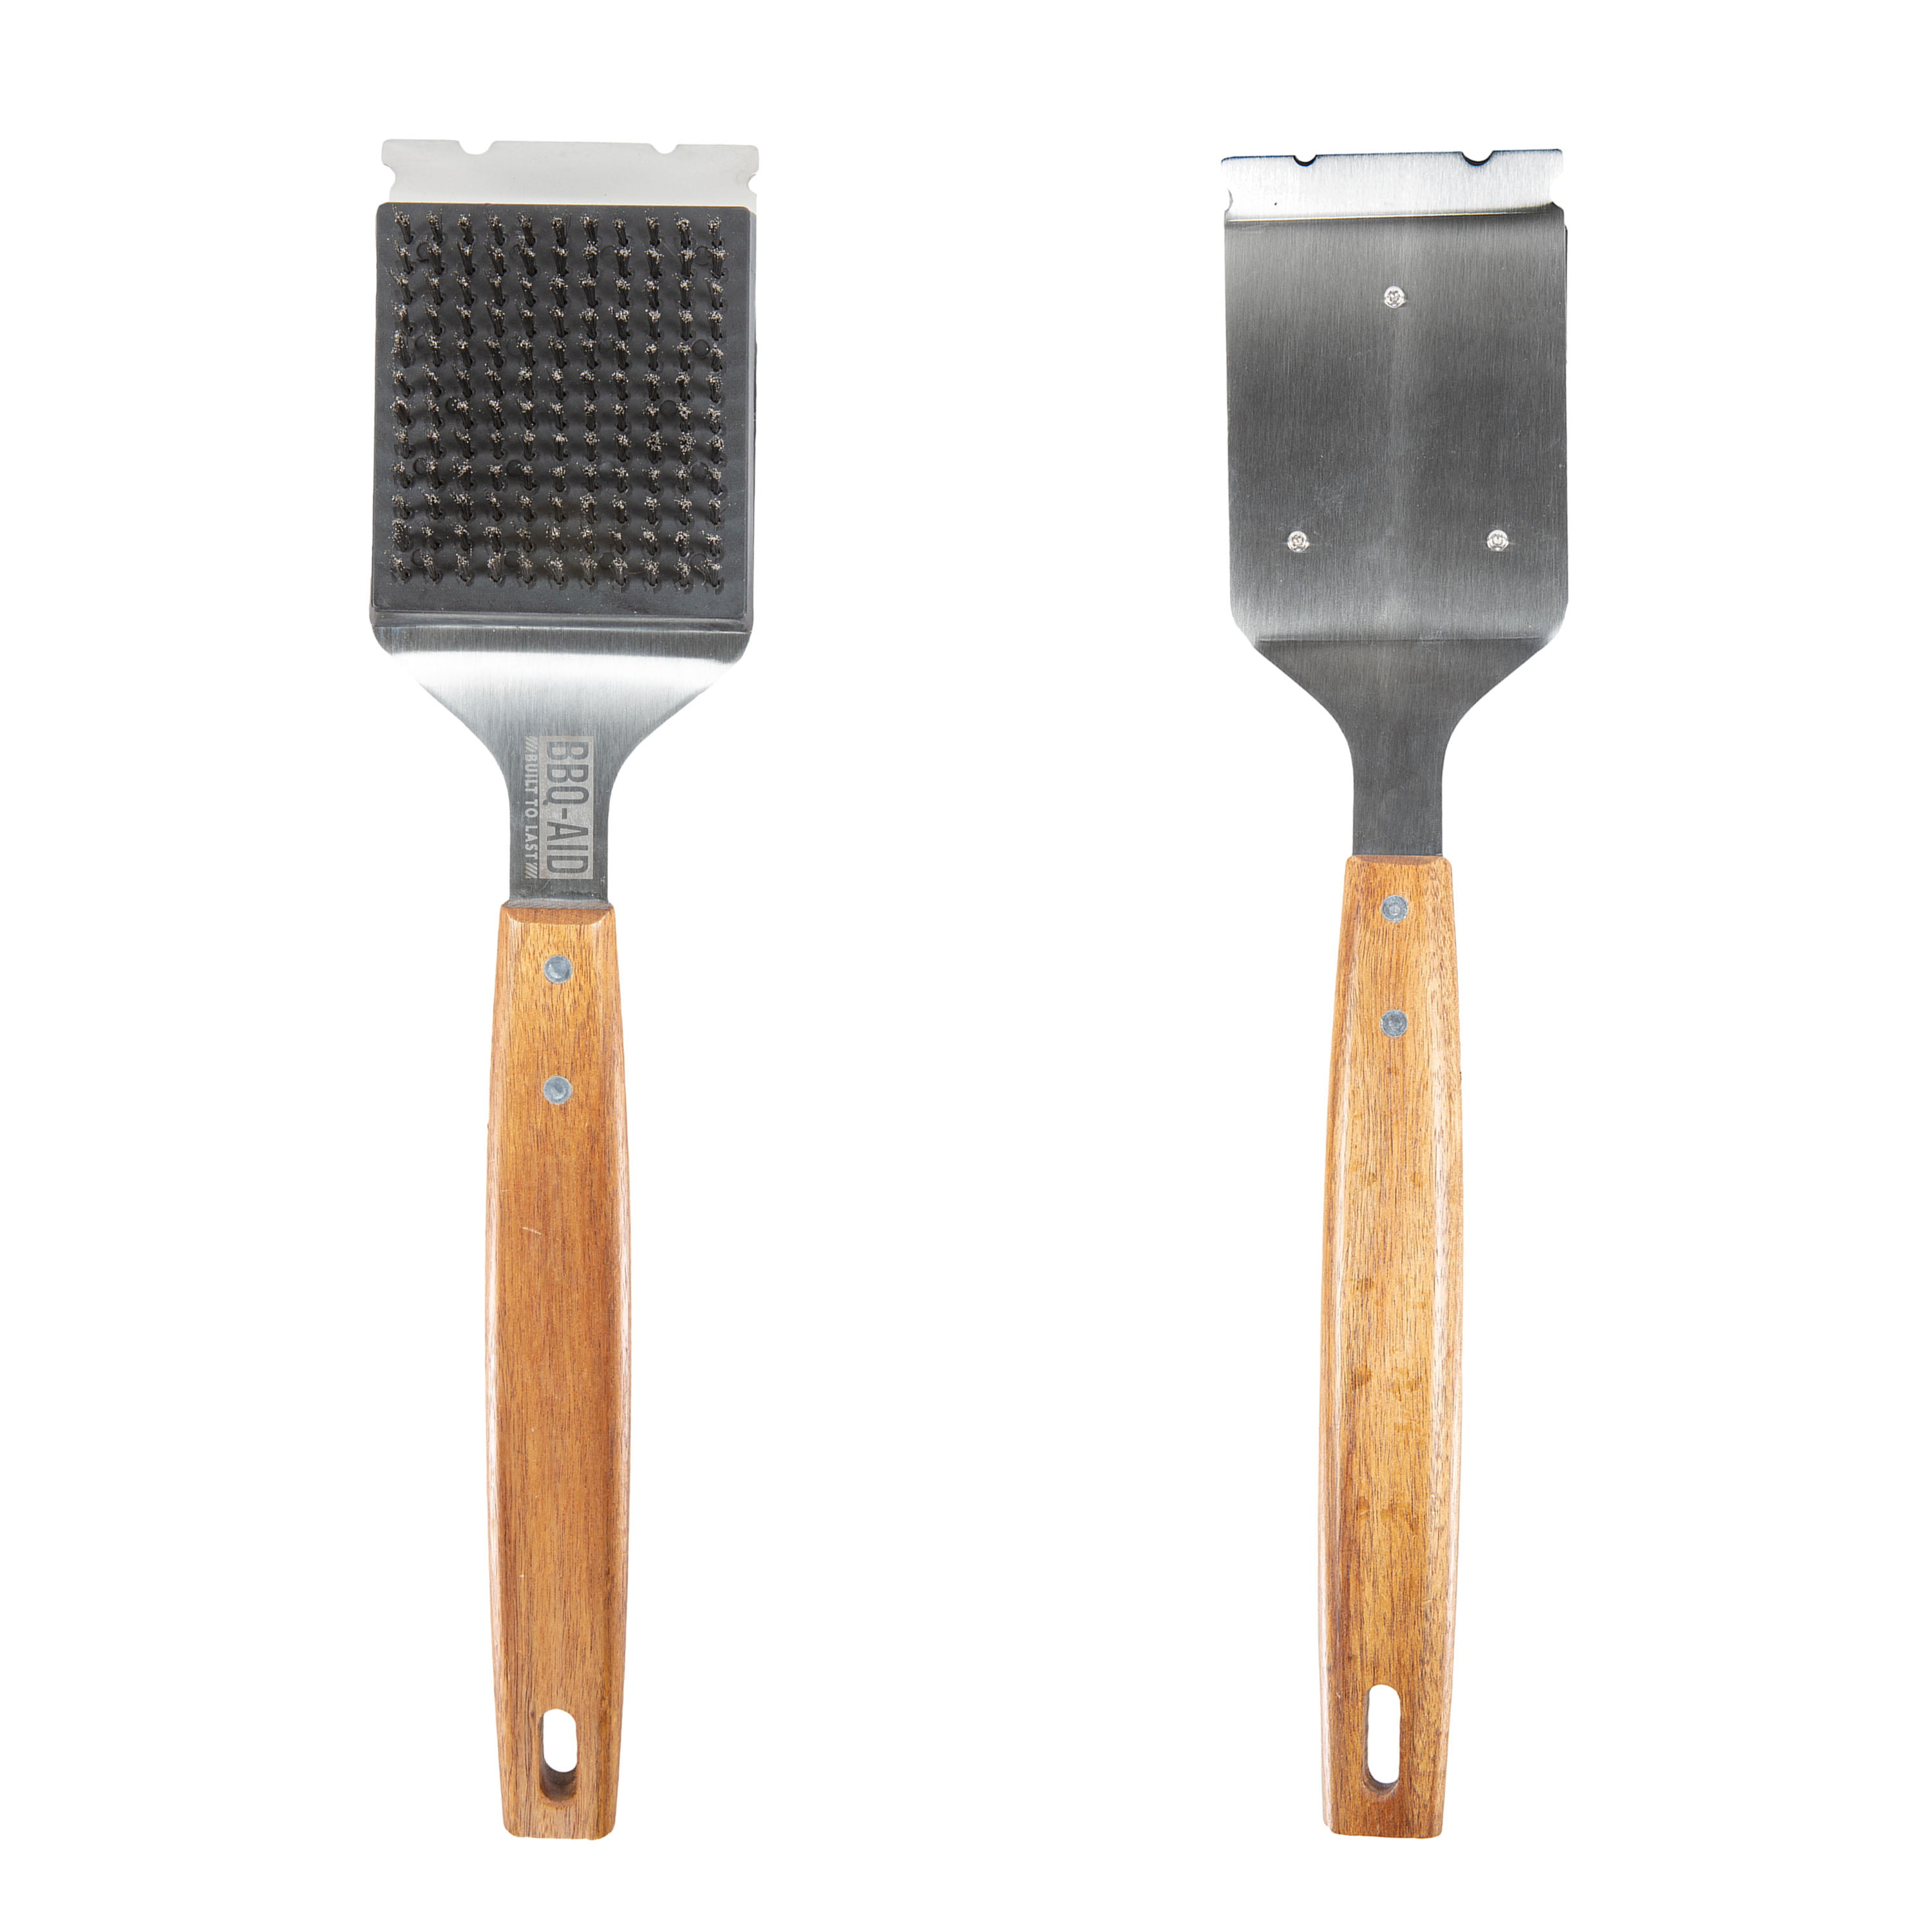 BBQ-AID Grill Brush and Scraper with 2 Replacement Heads - Extended, Large  Wooden Handle and Stainless Steel Bristles – Safe, No Scratch Cleaning 